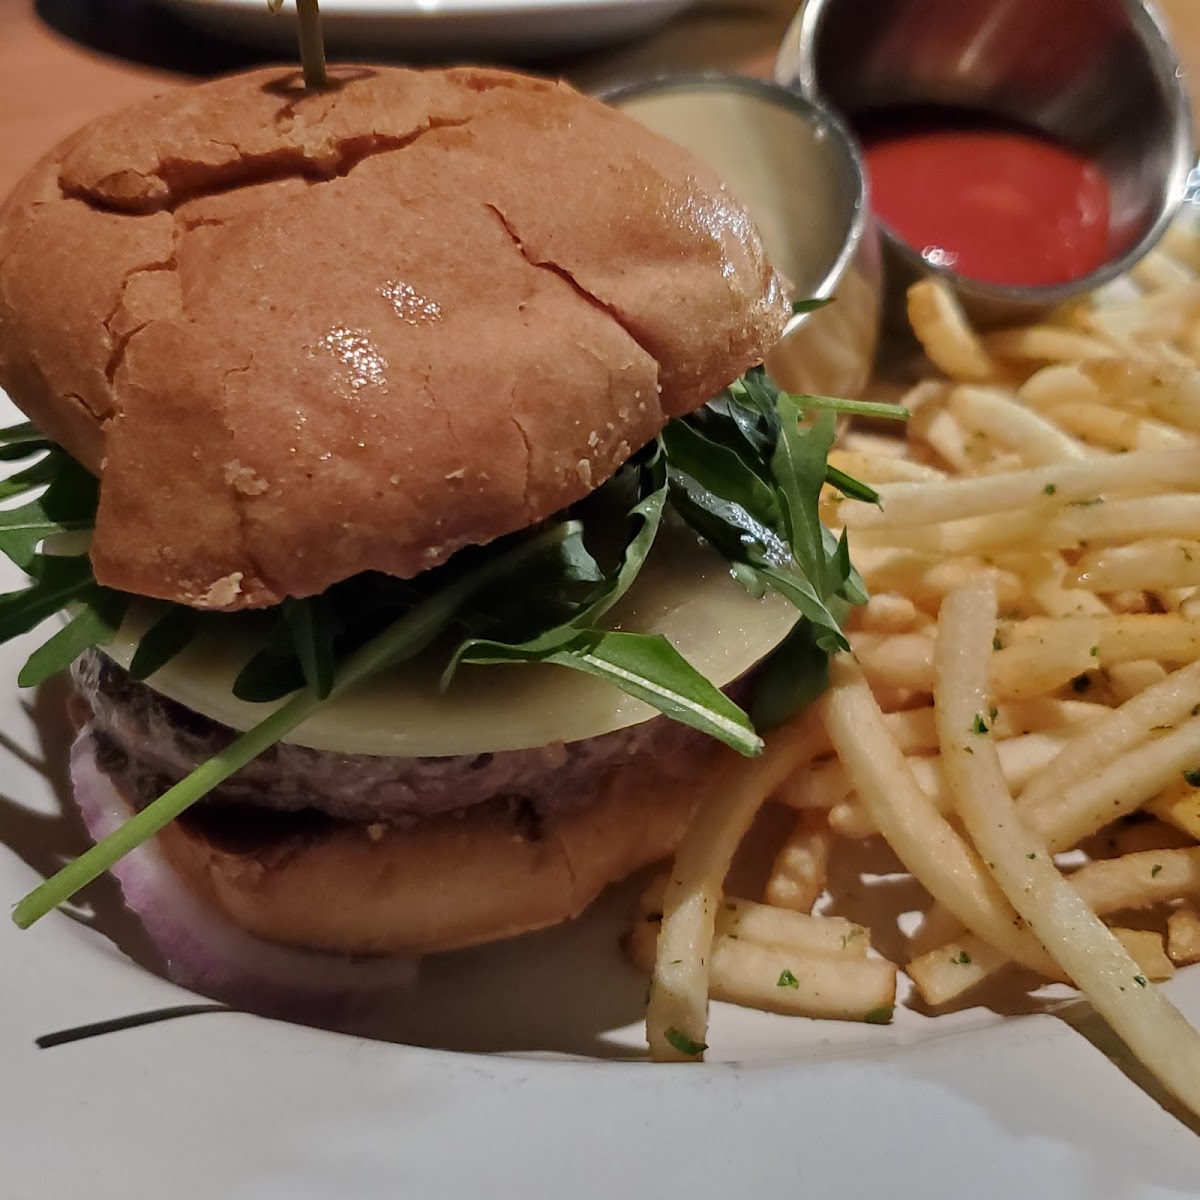 Burger with fries - both were the best part of our meal